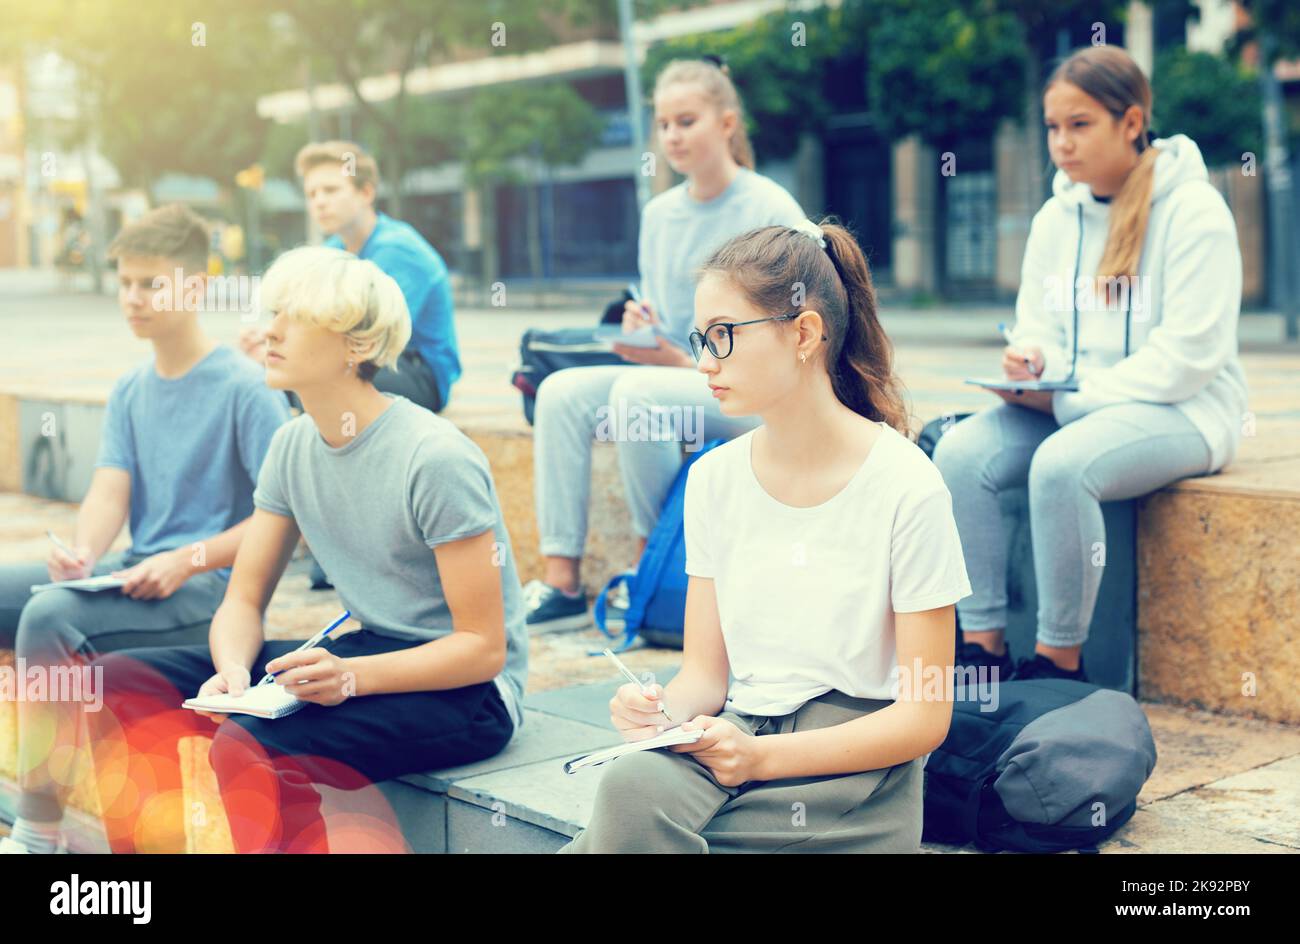 Focused teen students during lesson outside school Stock Photo